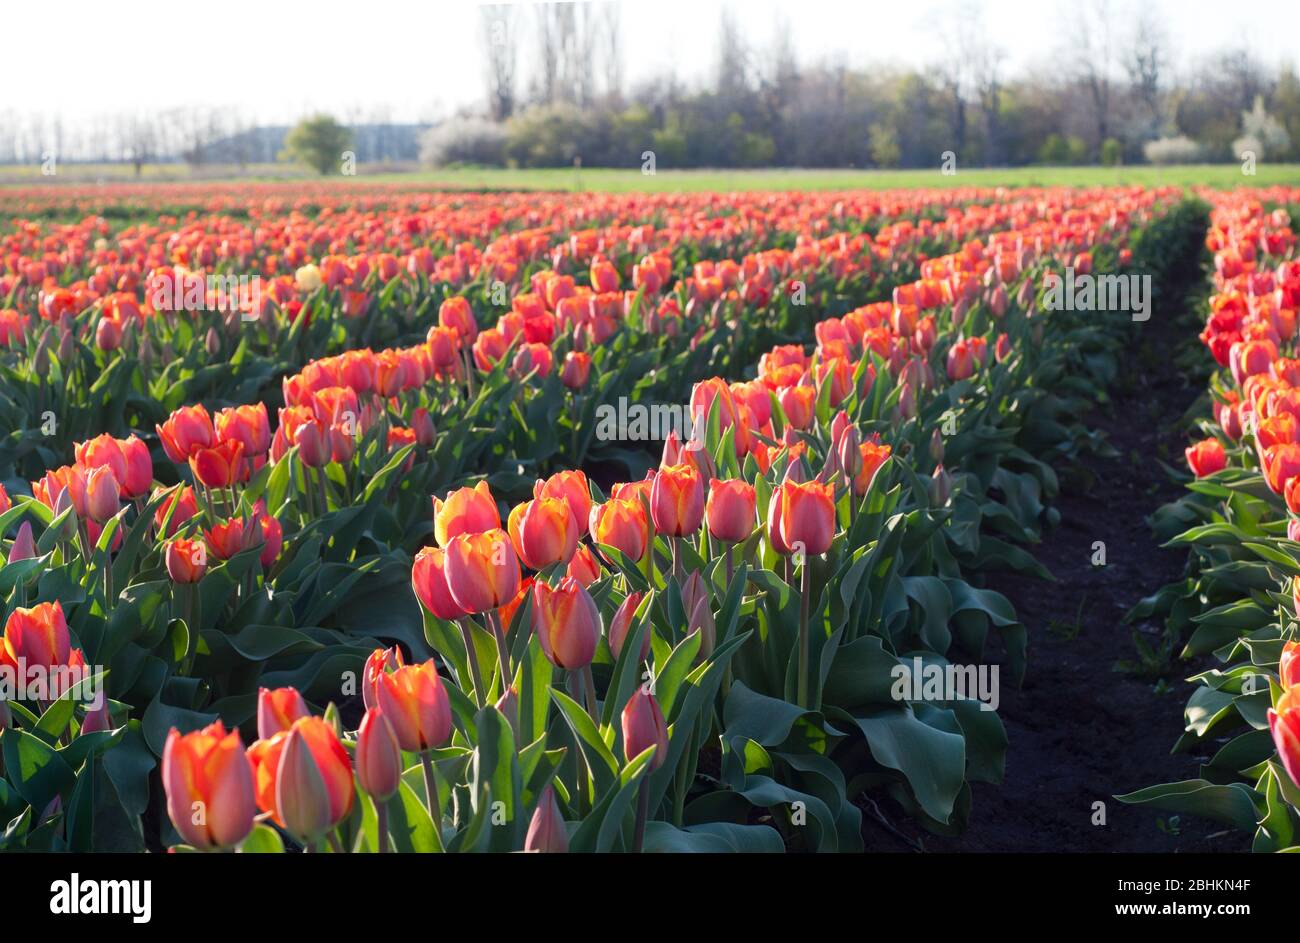 Field of red tulips. Growing tulip flowers in spring. Red tulip fields. Agriculture. Stock Photo